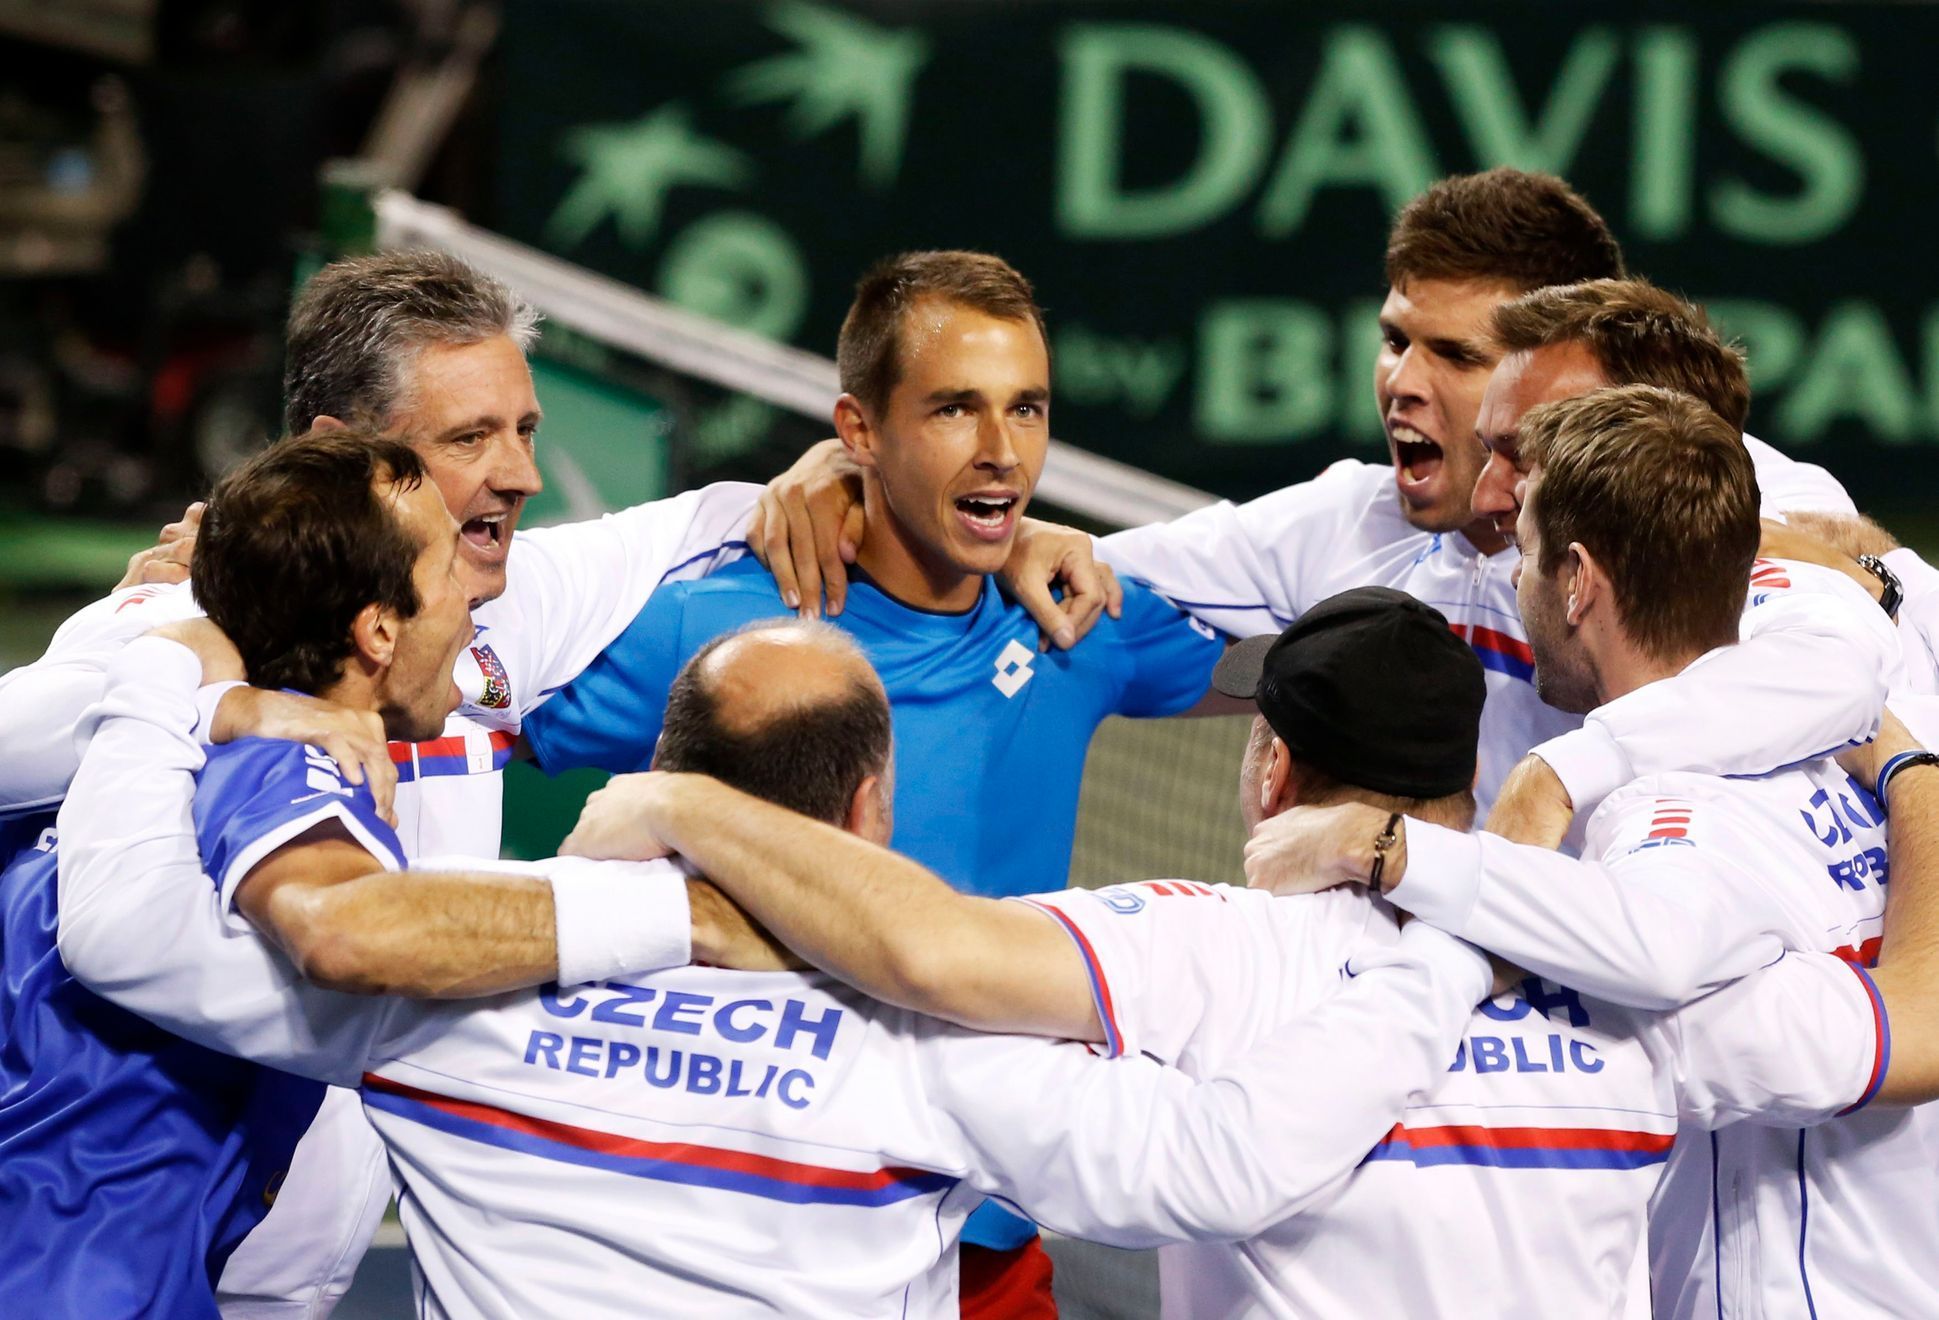 Rosol and Stepanek of the Czech Republic celebrate with their team mates after winning their Davis Cup quarter-final men's doubles tennis match against Japan's Ito and Uchiyama in Tokyo